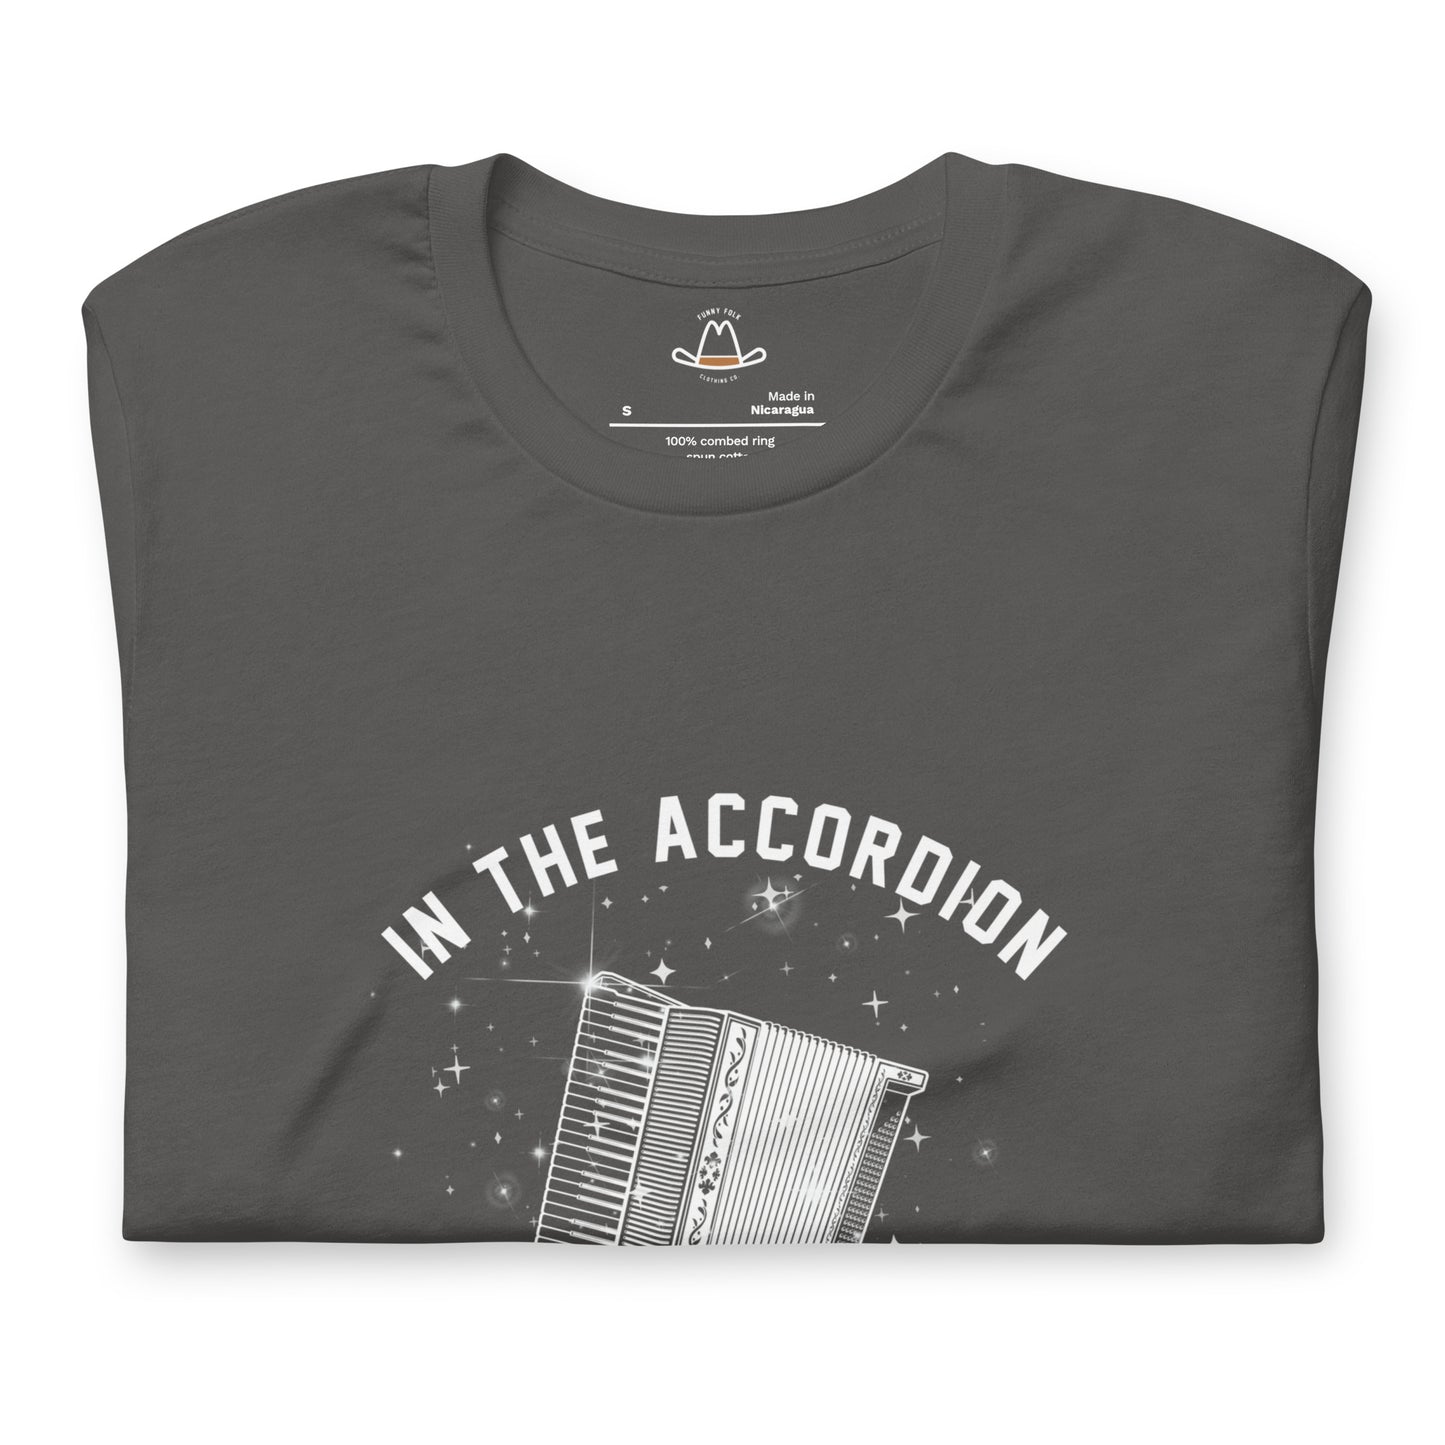 In The Accordion There is Trust Original Tee